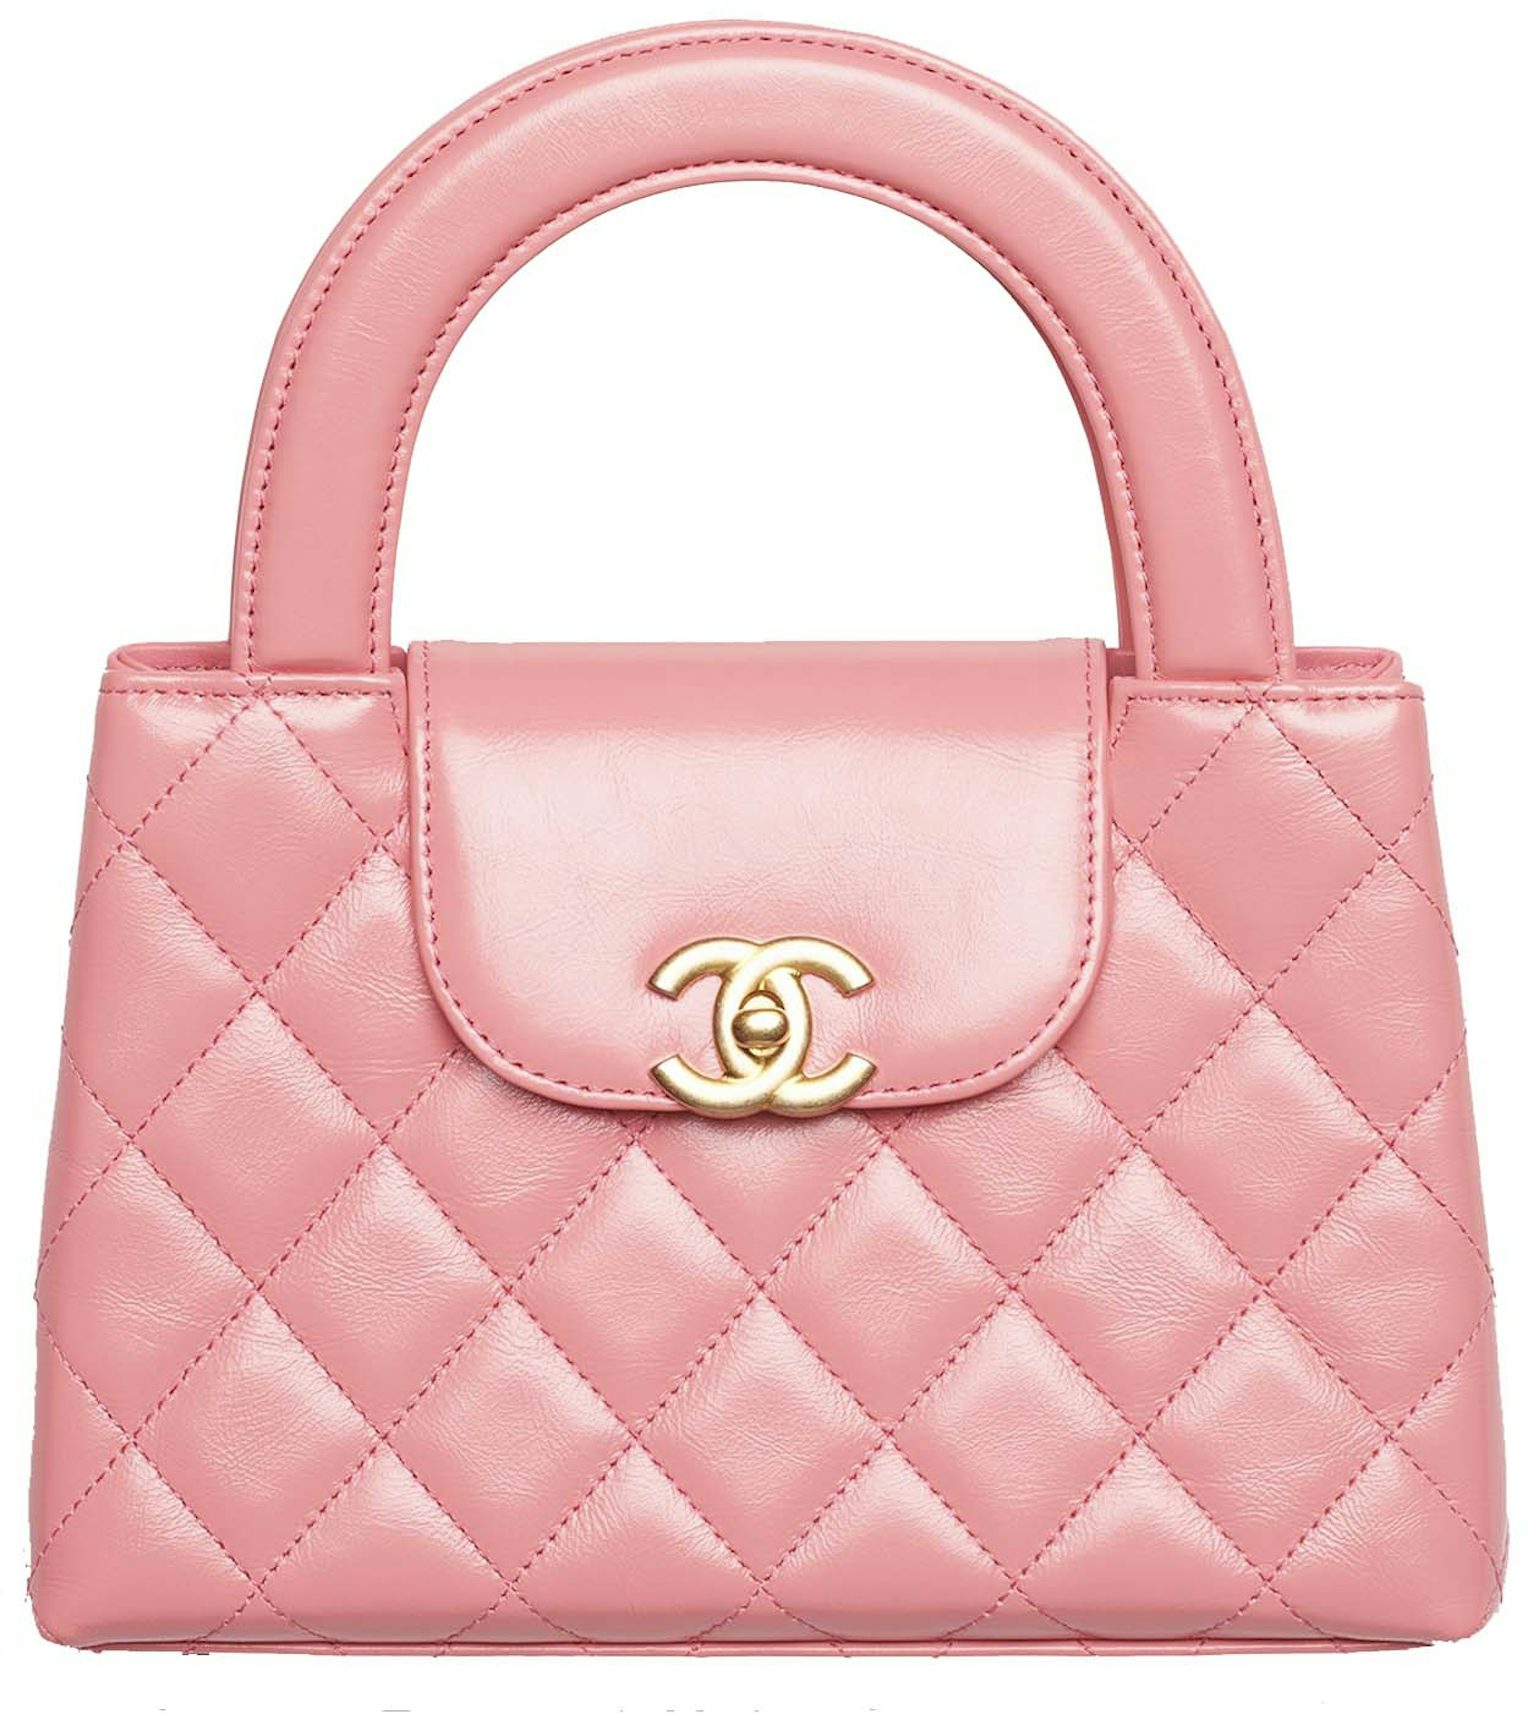 Buy Chanel Accessories - Color Pink - StockX